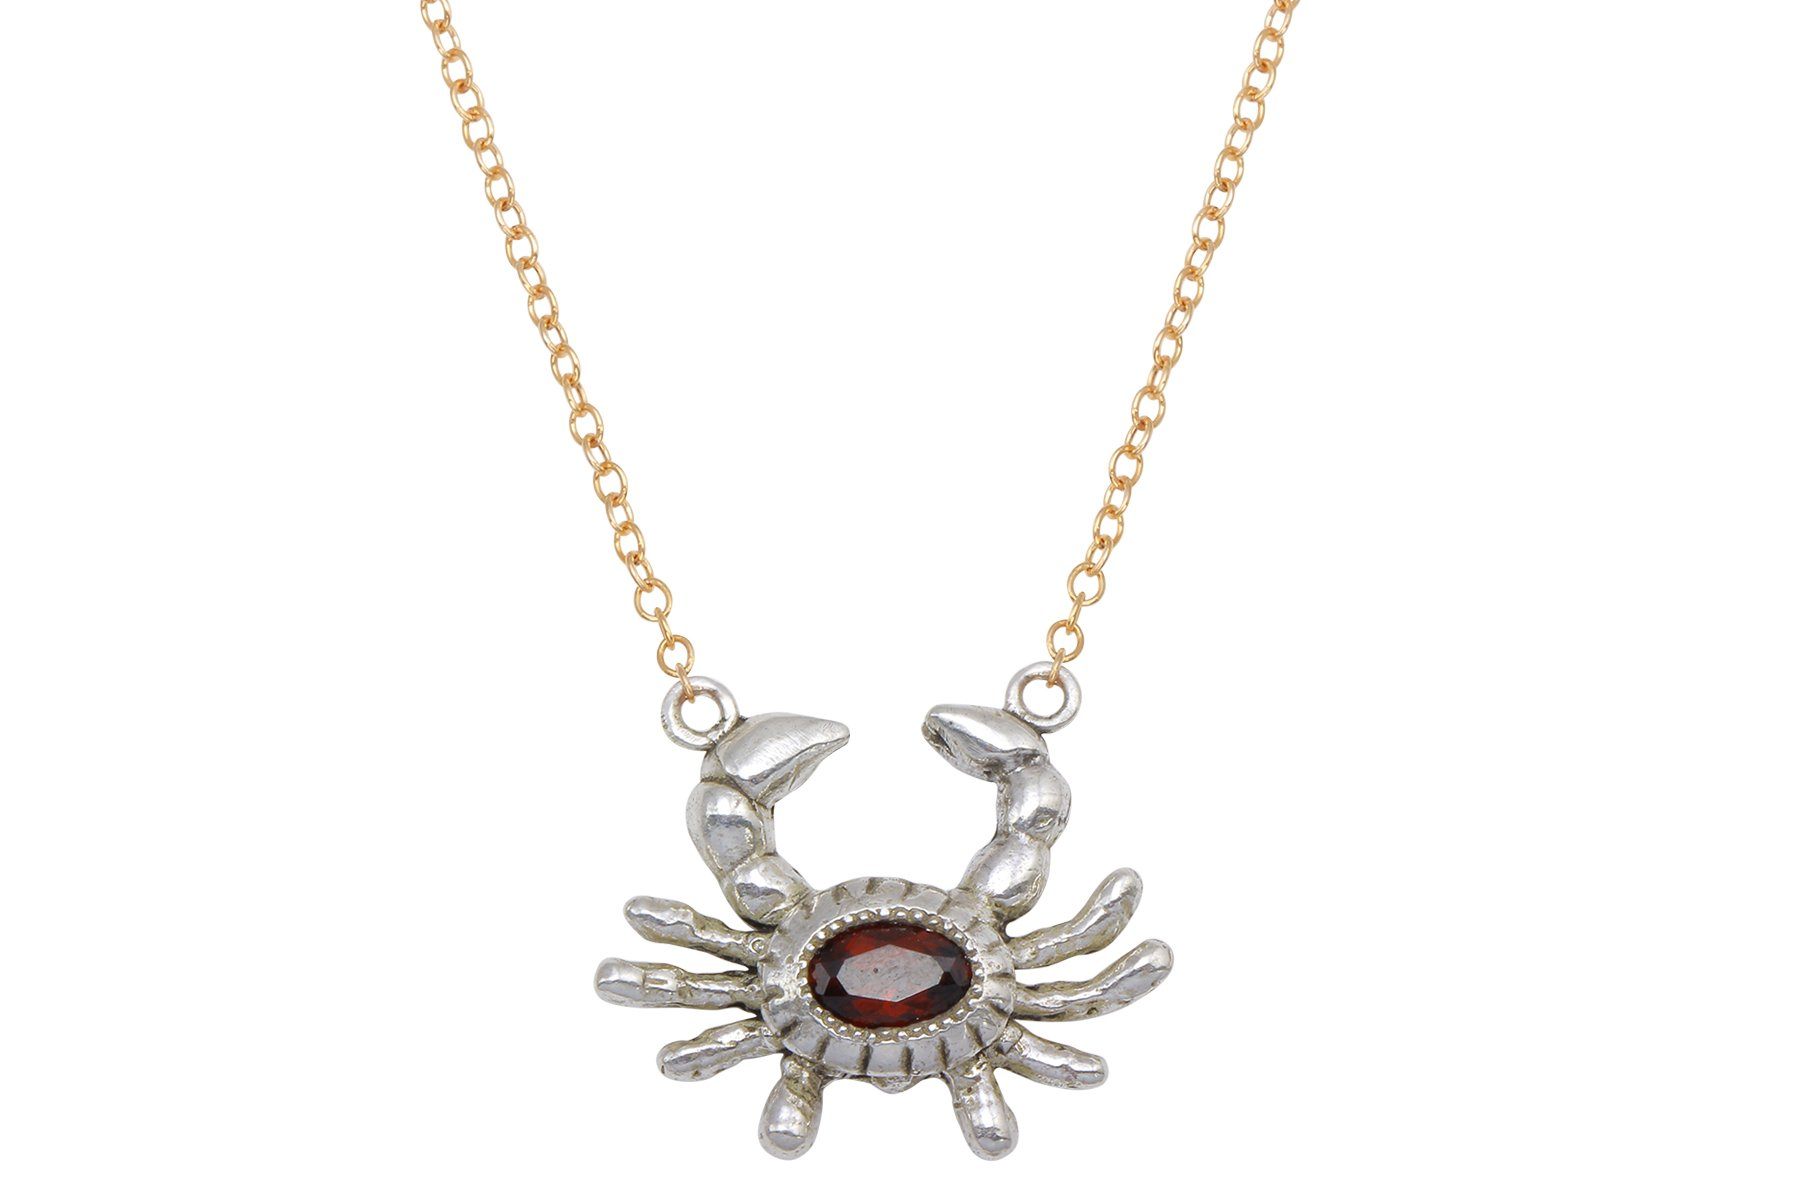 Crab necklace - sterling silver and garnet necklace - ready to ship necklace Amanda K Lockrow 